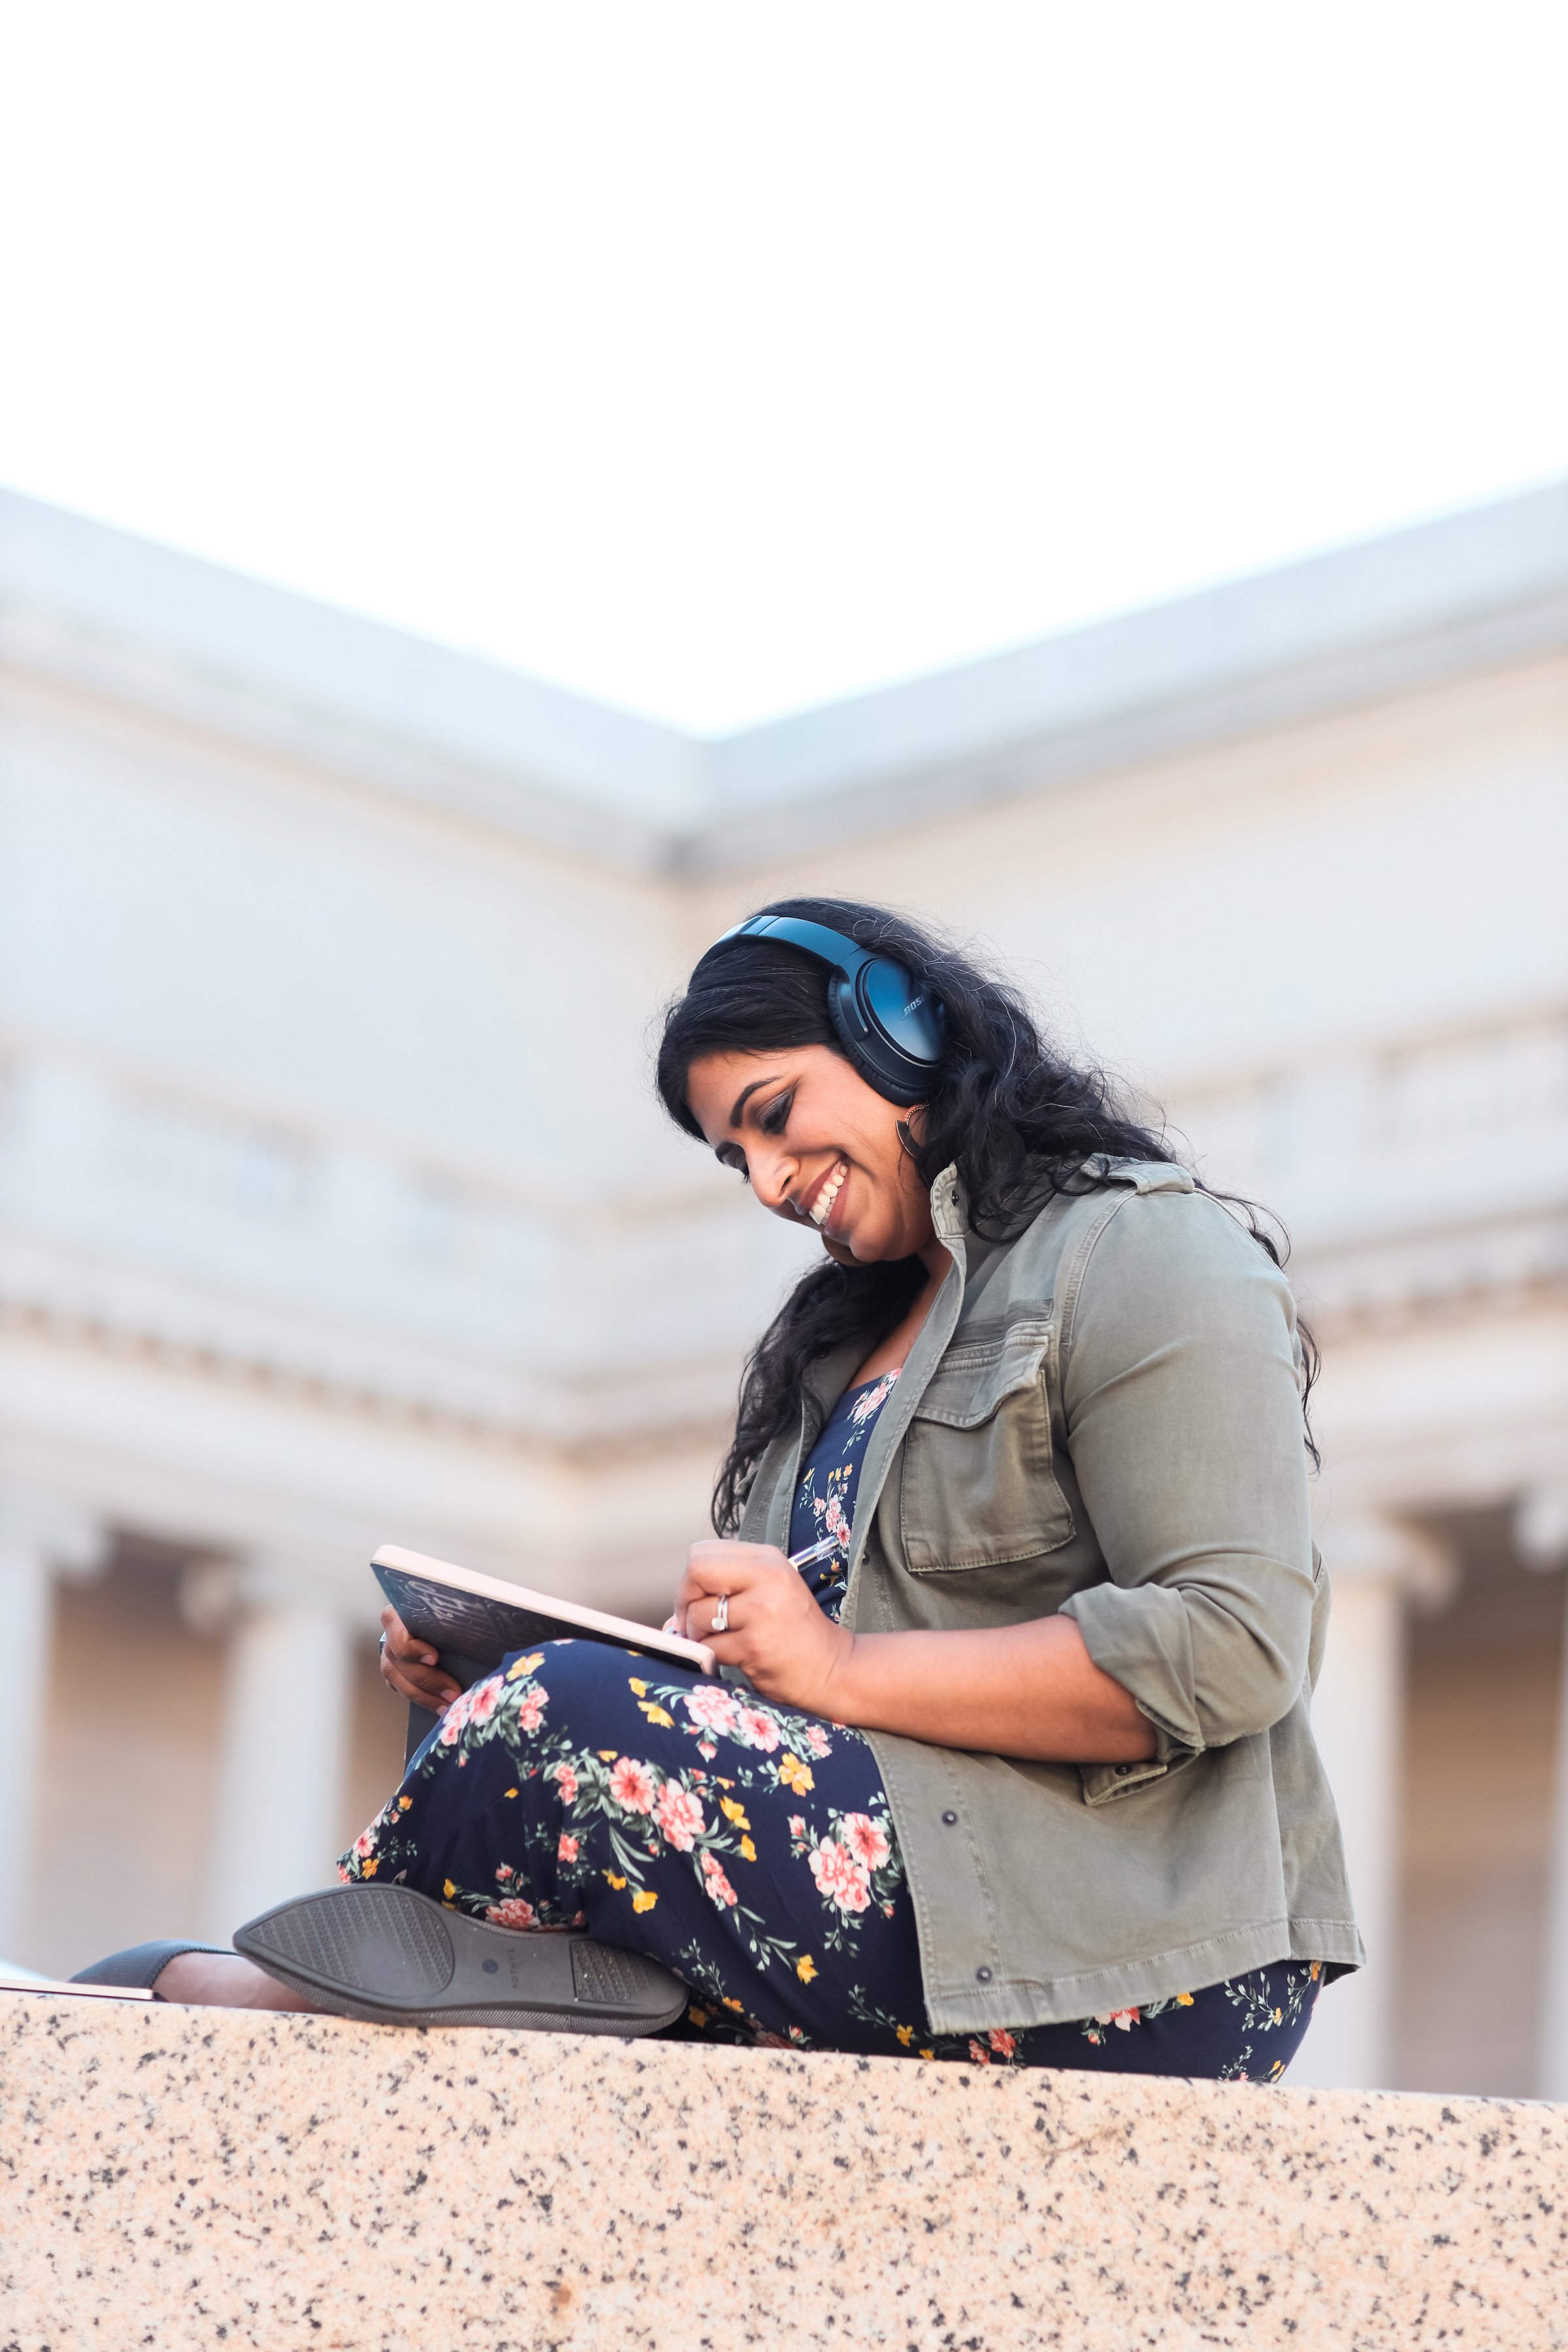 Author Neha sitting outside with her headphones on, smiling, and working on her tablet